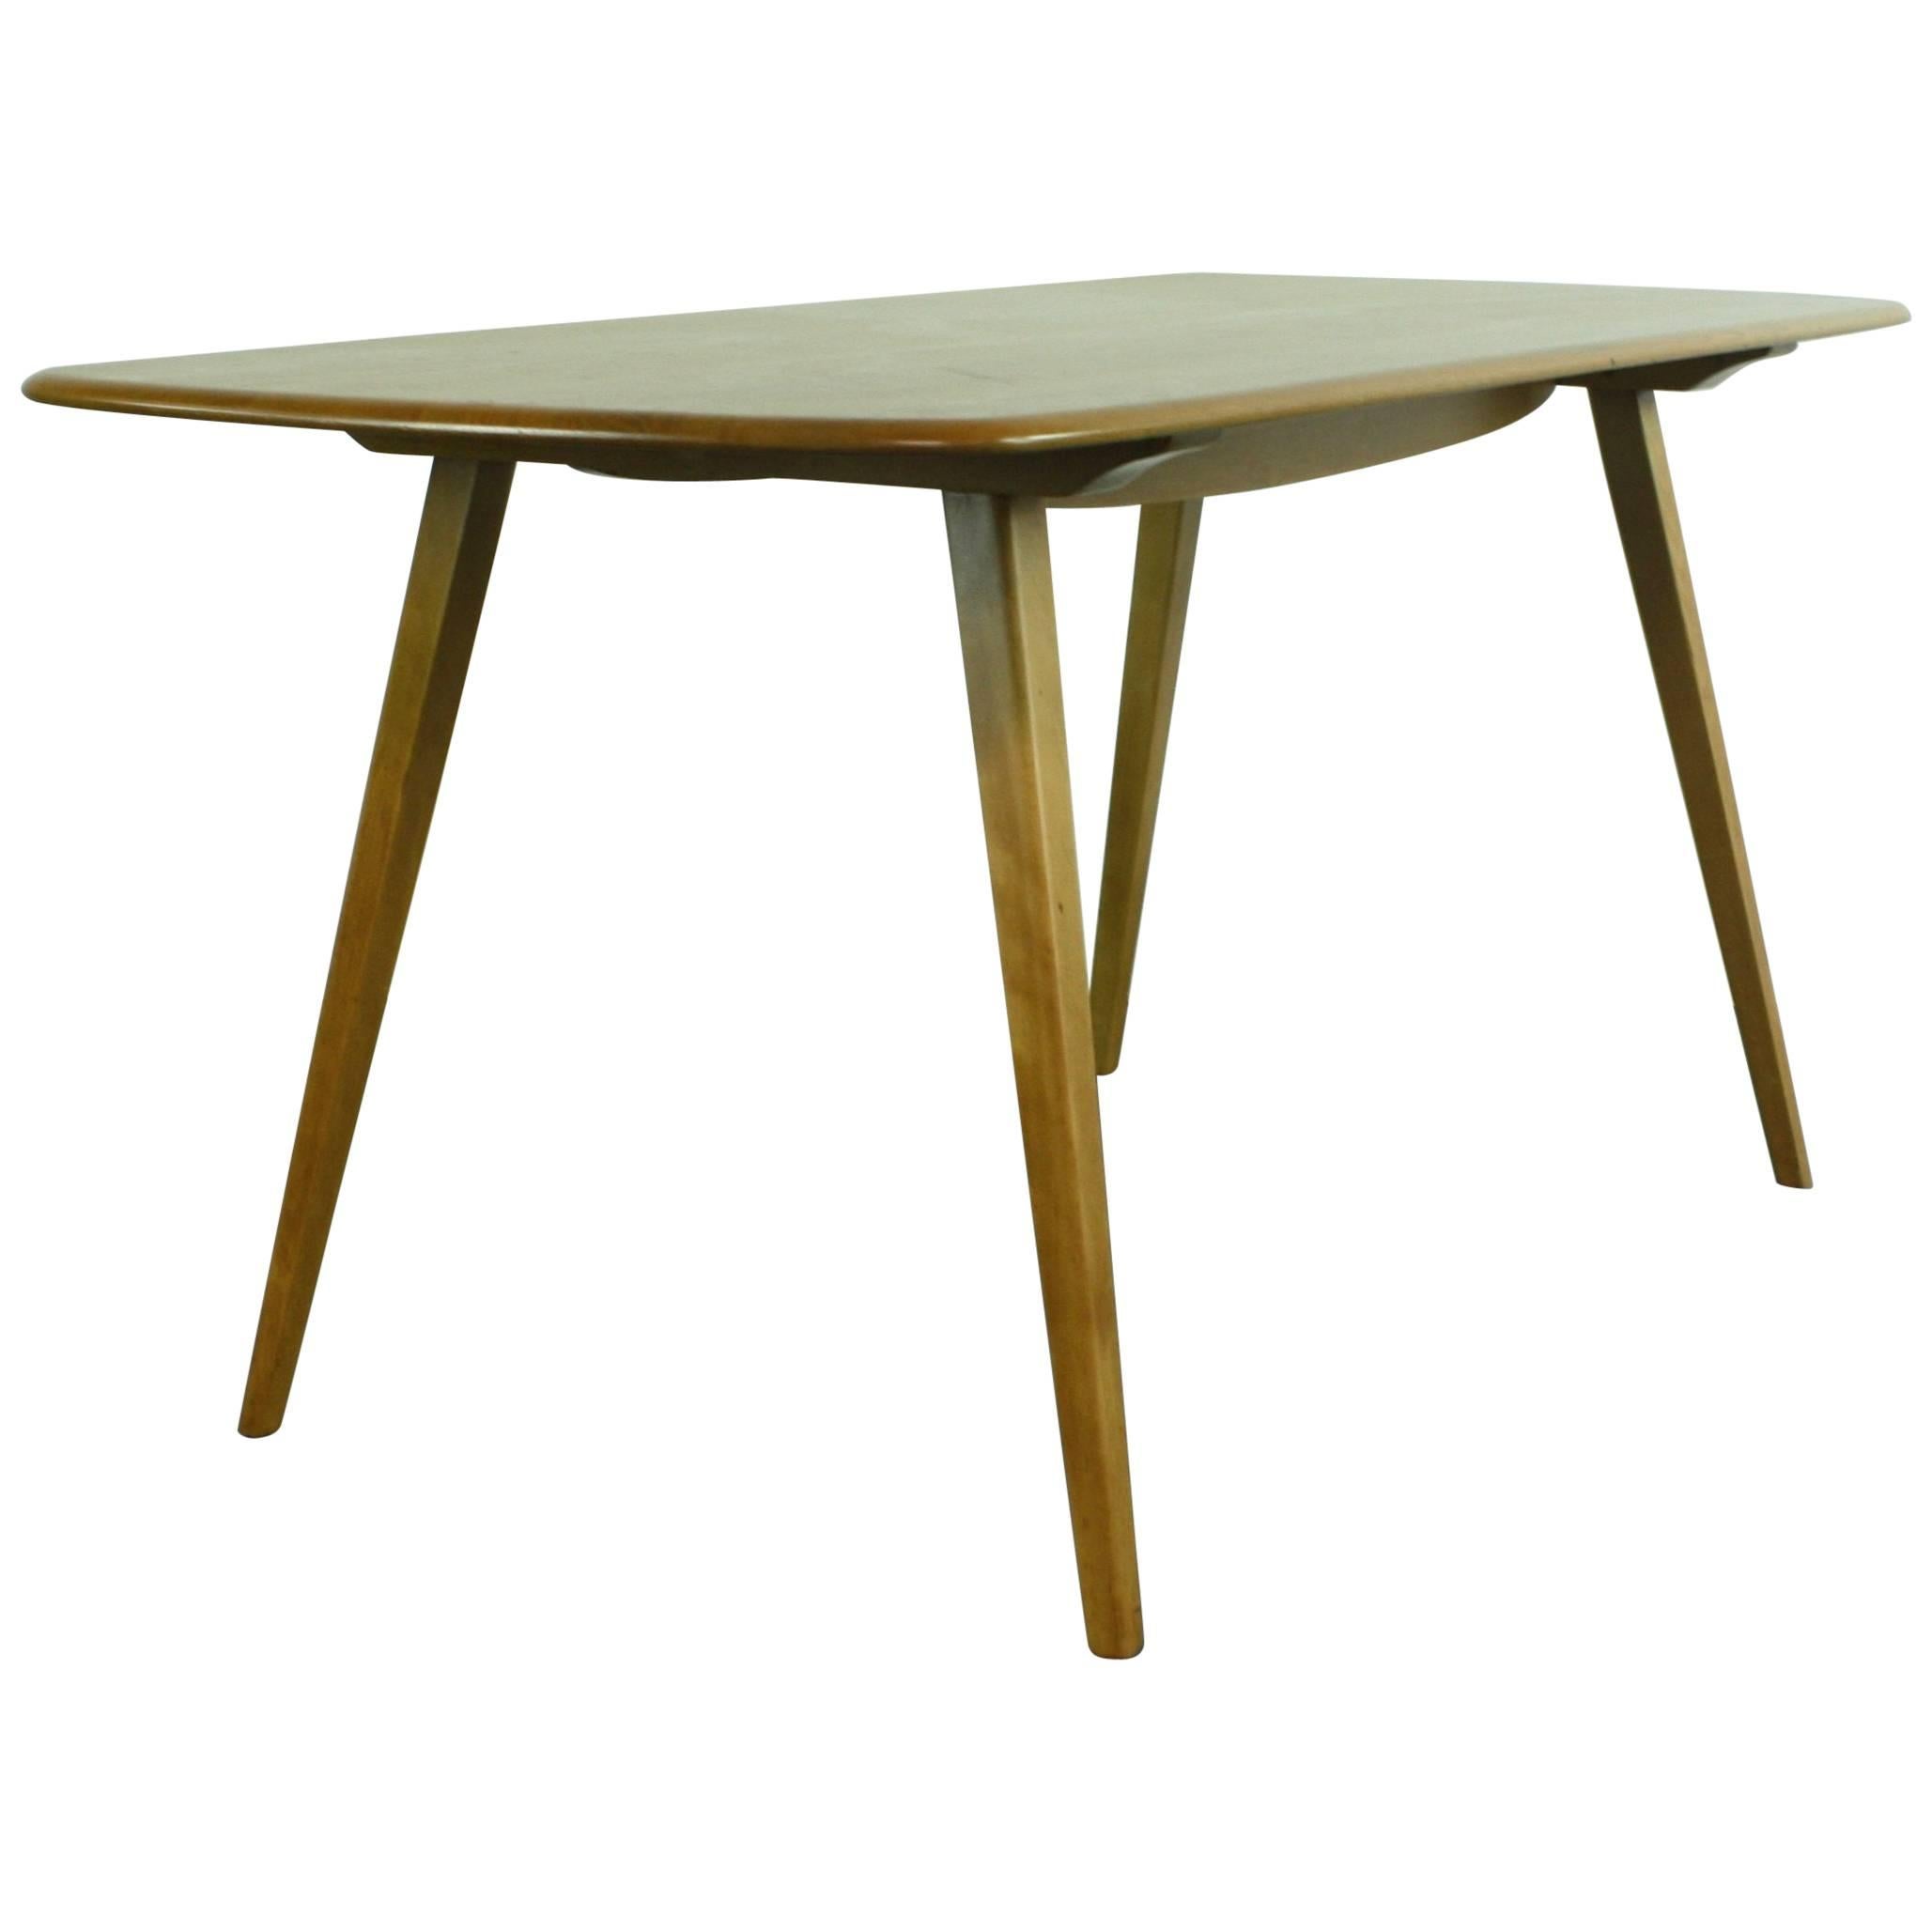 Vintage Midcentury British Ercol Plank Dining Table For Sale